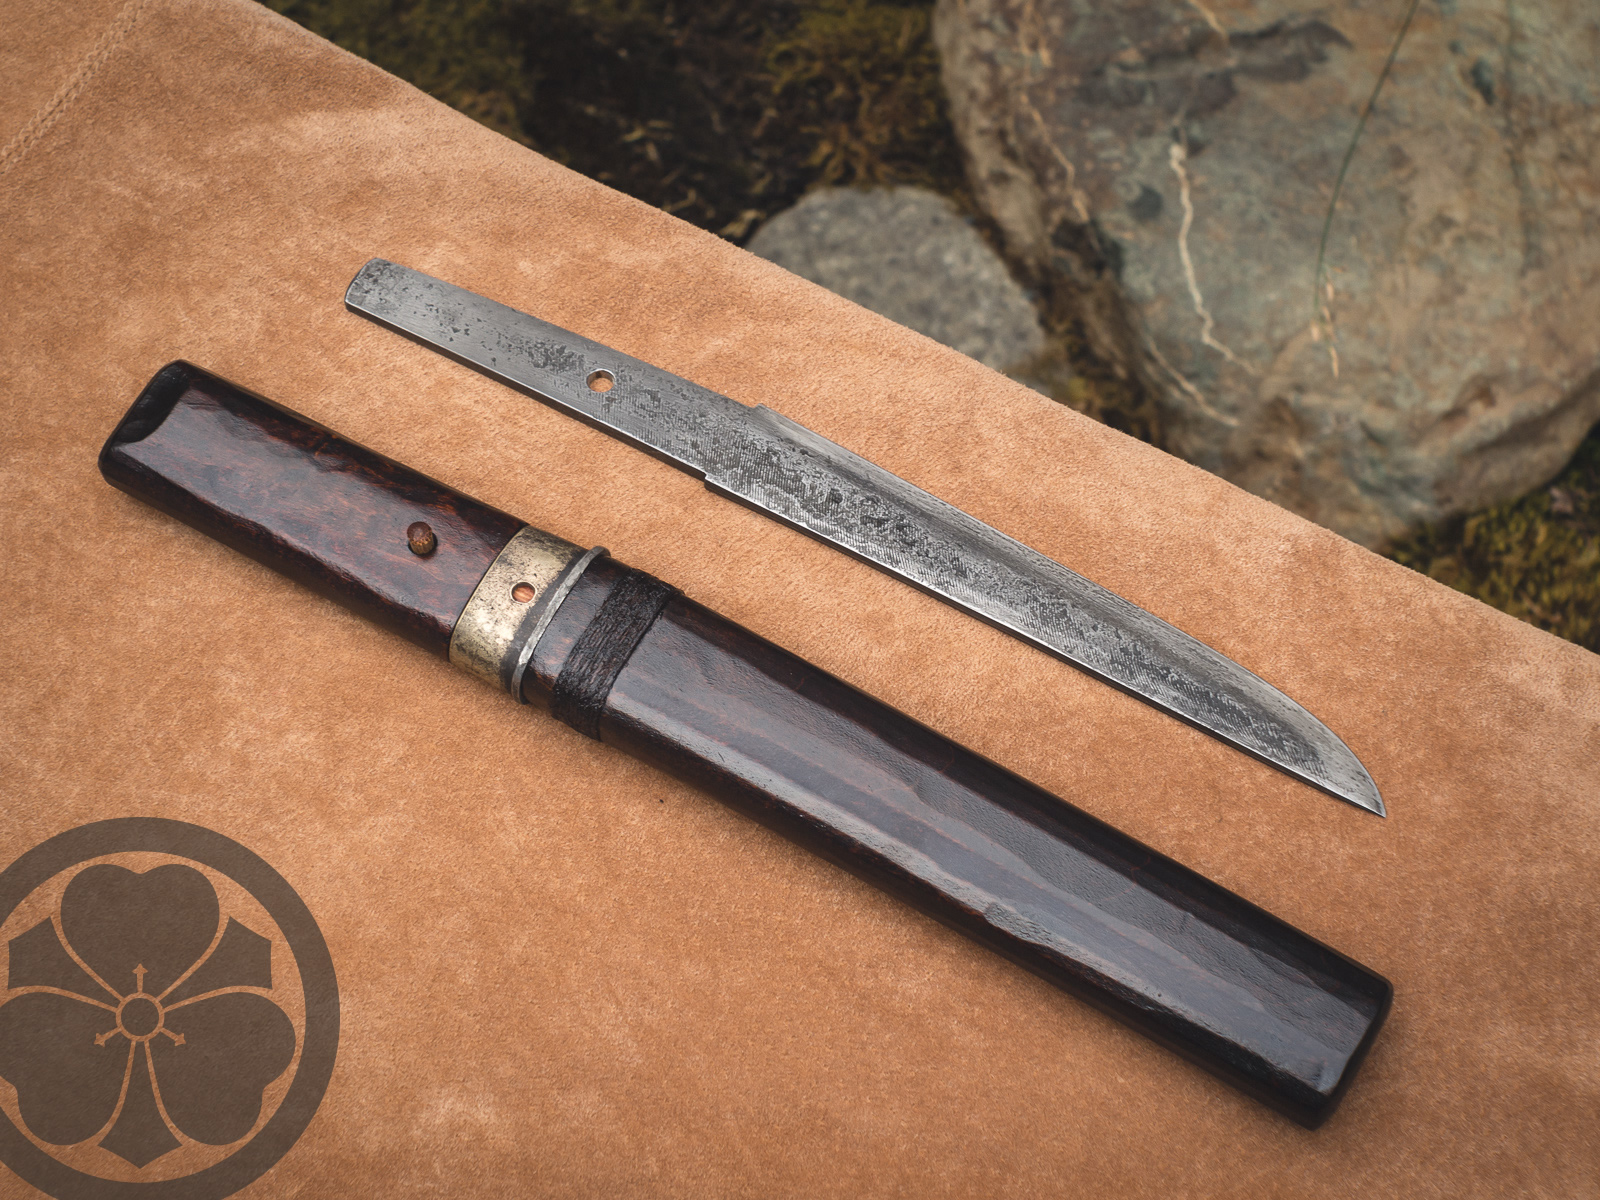 Island Blacksmith: Charcoal forged knives from reclaimed steel.